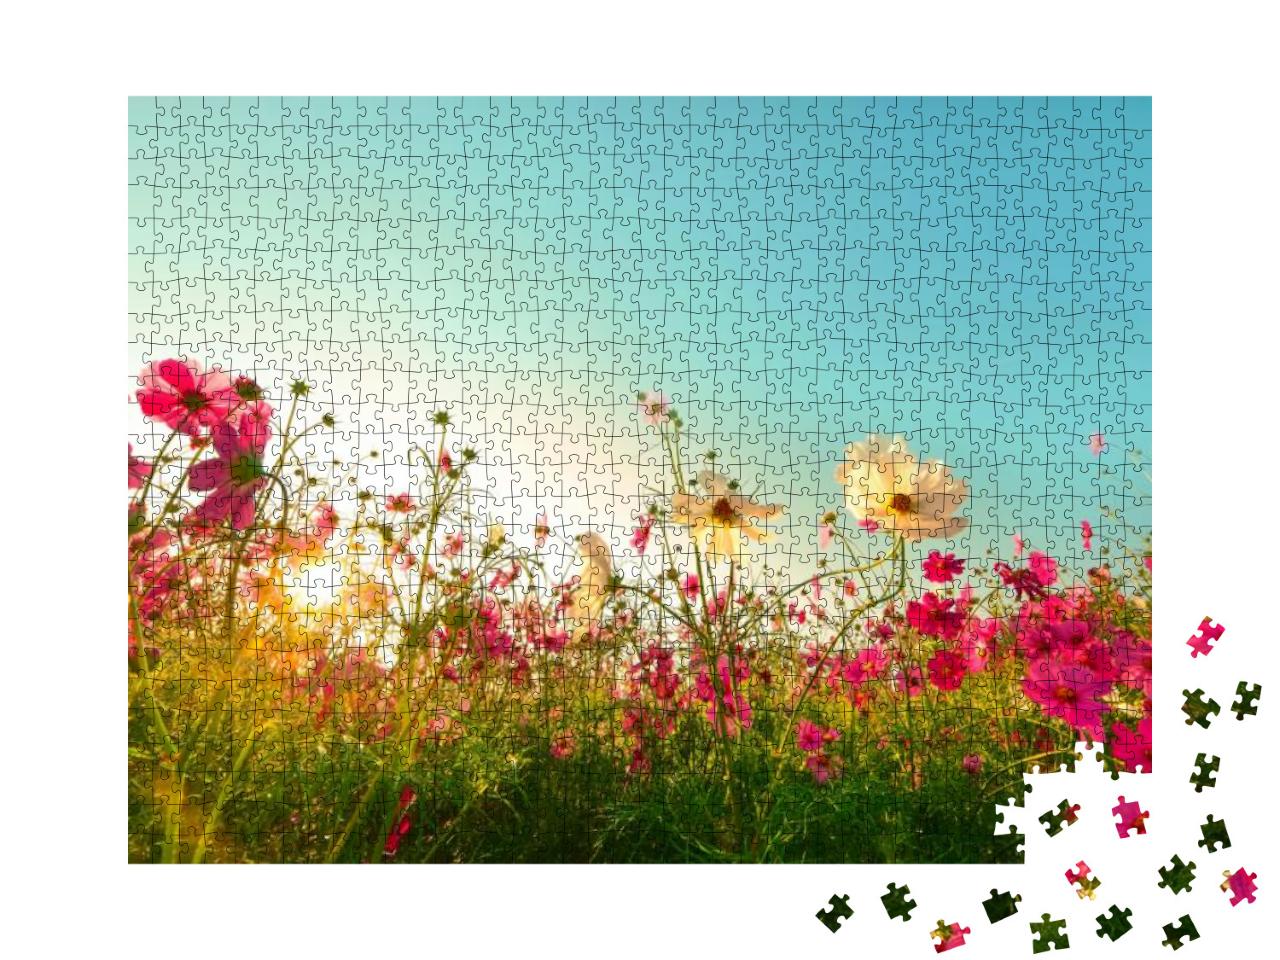 Beautiful Cosmos Flowers Blooming in Garden... Jigsaw Puzzle with 1000 pieces